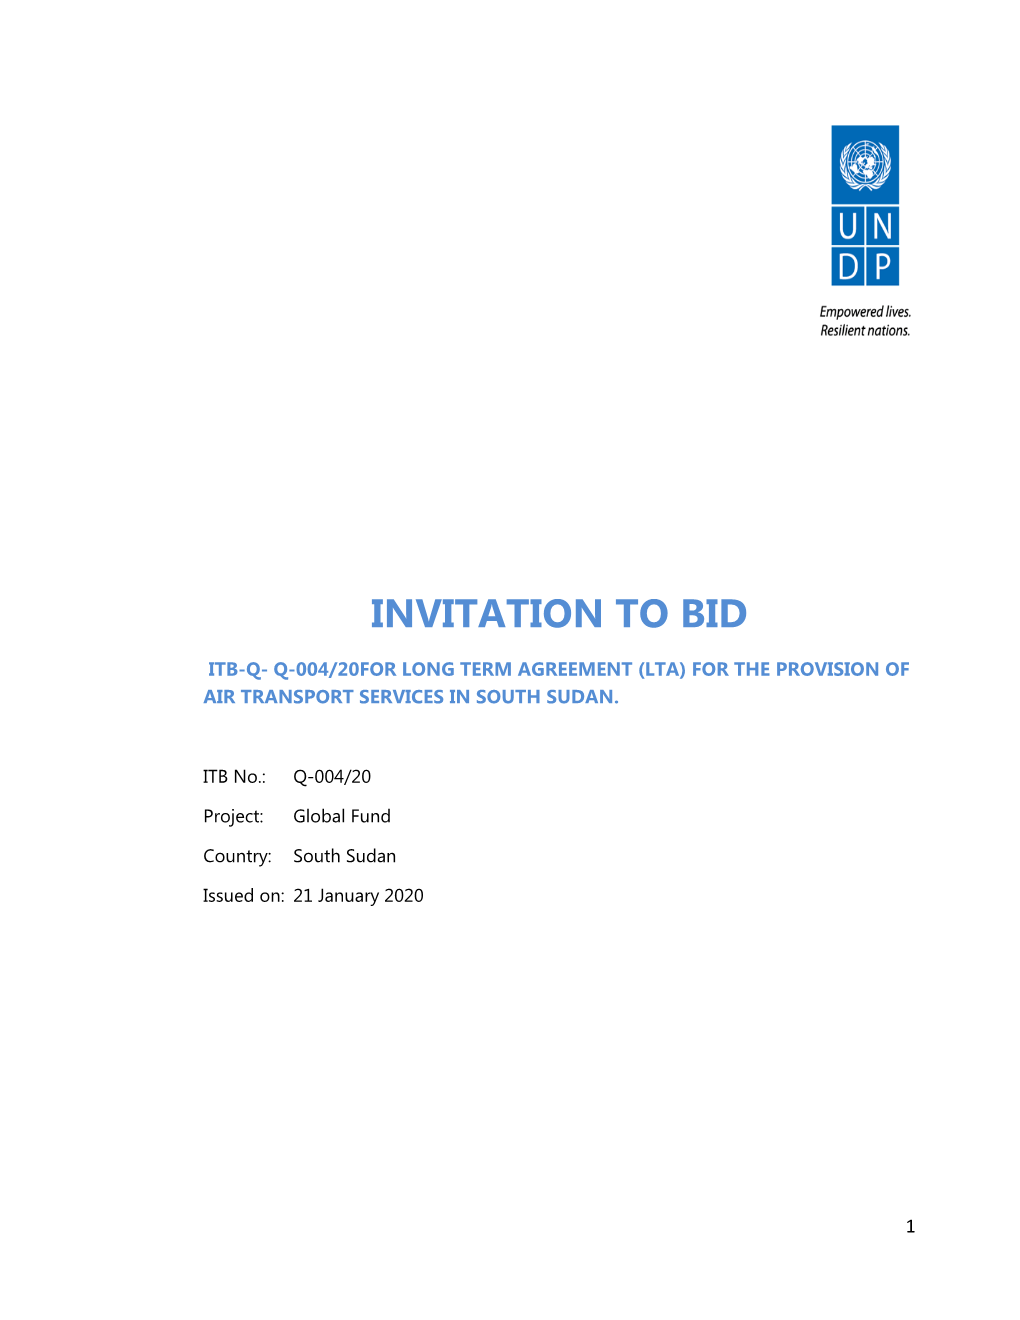 Itb-Q- Q-004/20For Long Term Agreement (Lta) for the Provision of Air Transport Services in South Sudan